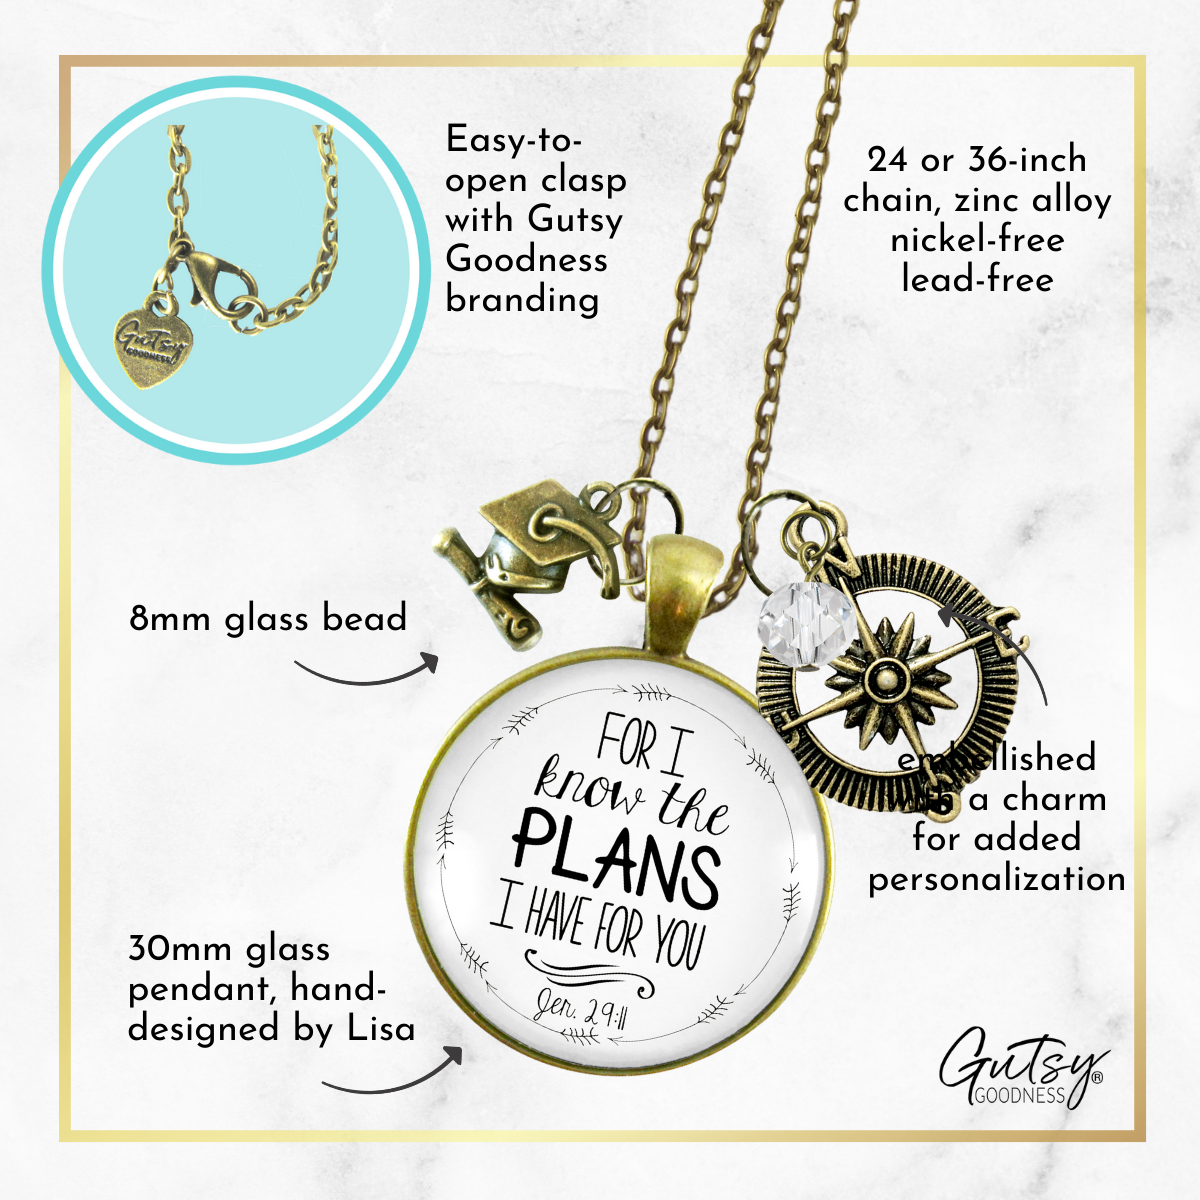 Gutsy Goodness Christian Graduate Necklace for I Know Plans Jeremiah 29 11 Compass - Gutsy Goodness Handmade Jewelry;Christian Graduate Necklace For I Know Plans Jeremiah 29 11 Compass - Gutsy Goodness Handmade Jewelry Gifts